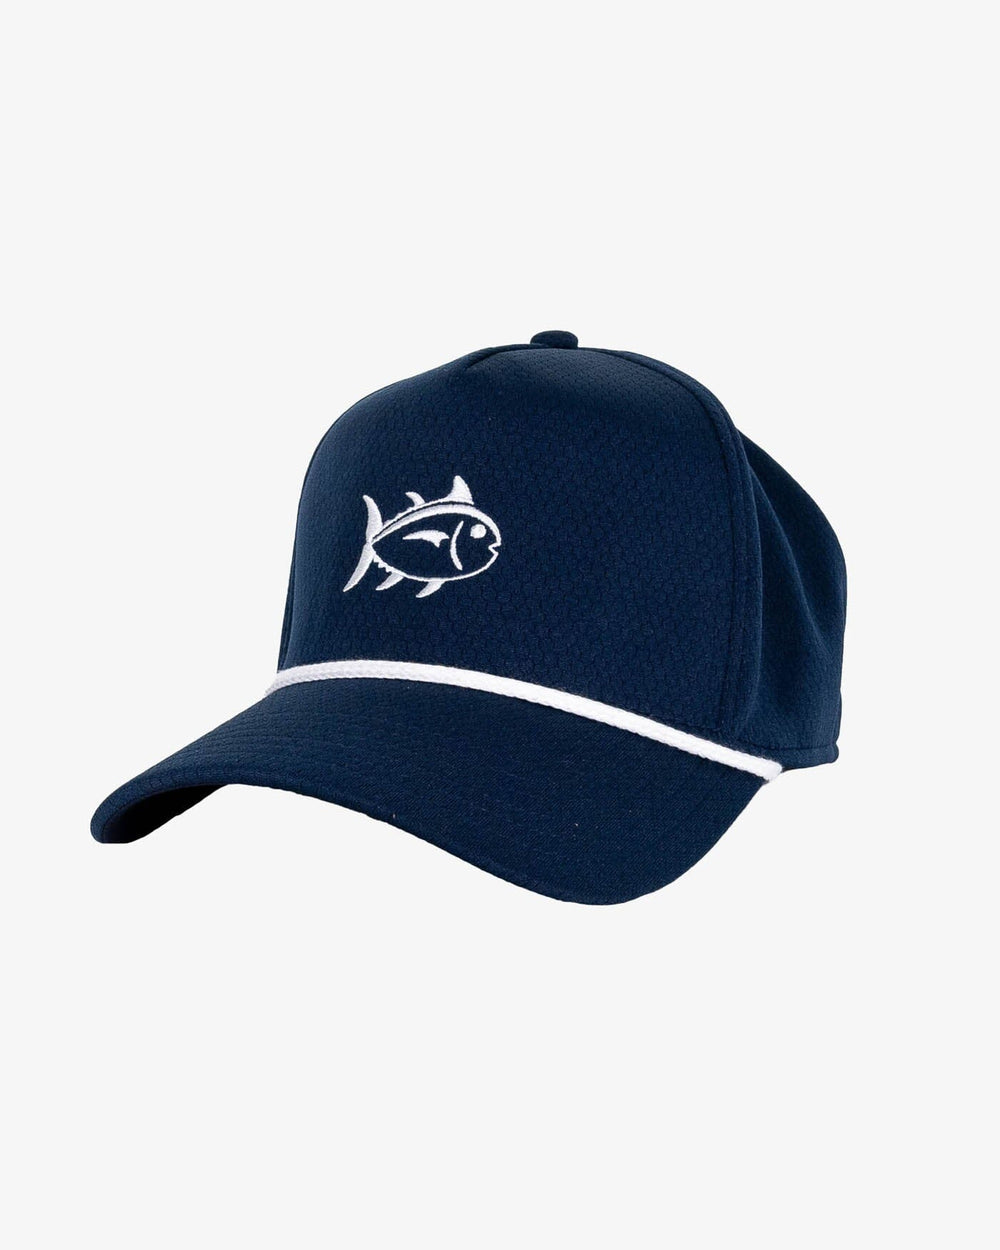 The front view of the Southern Tide Skipjack Honeycomb Snapback Hat by Southern Tide - Navy